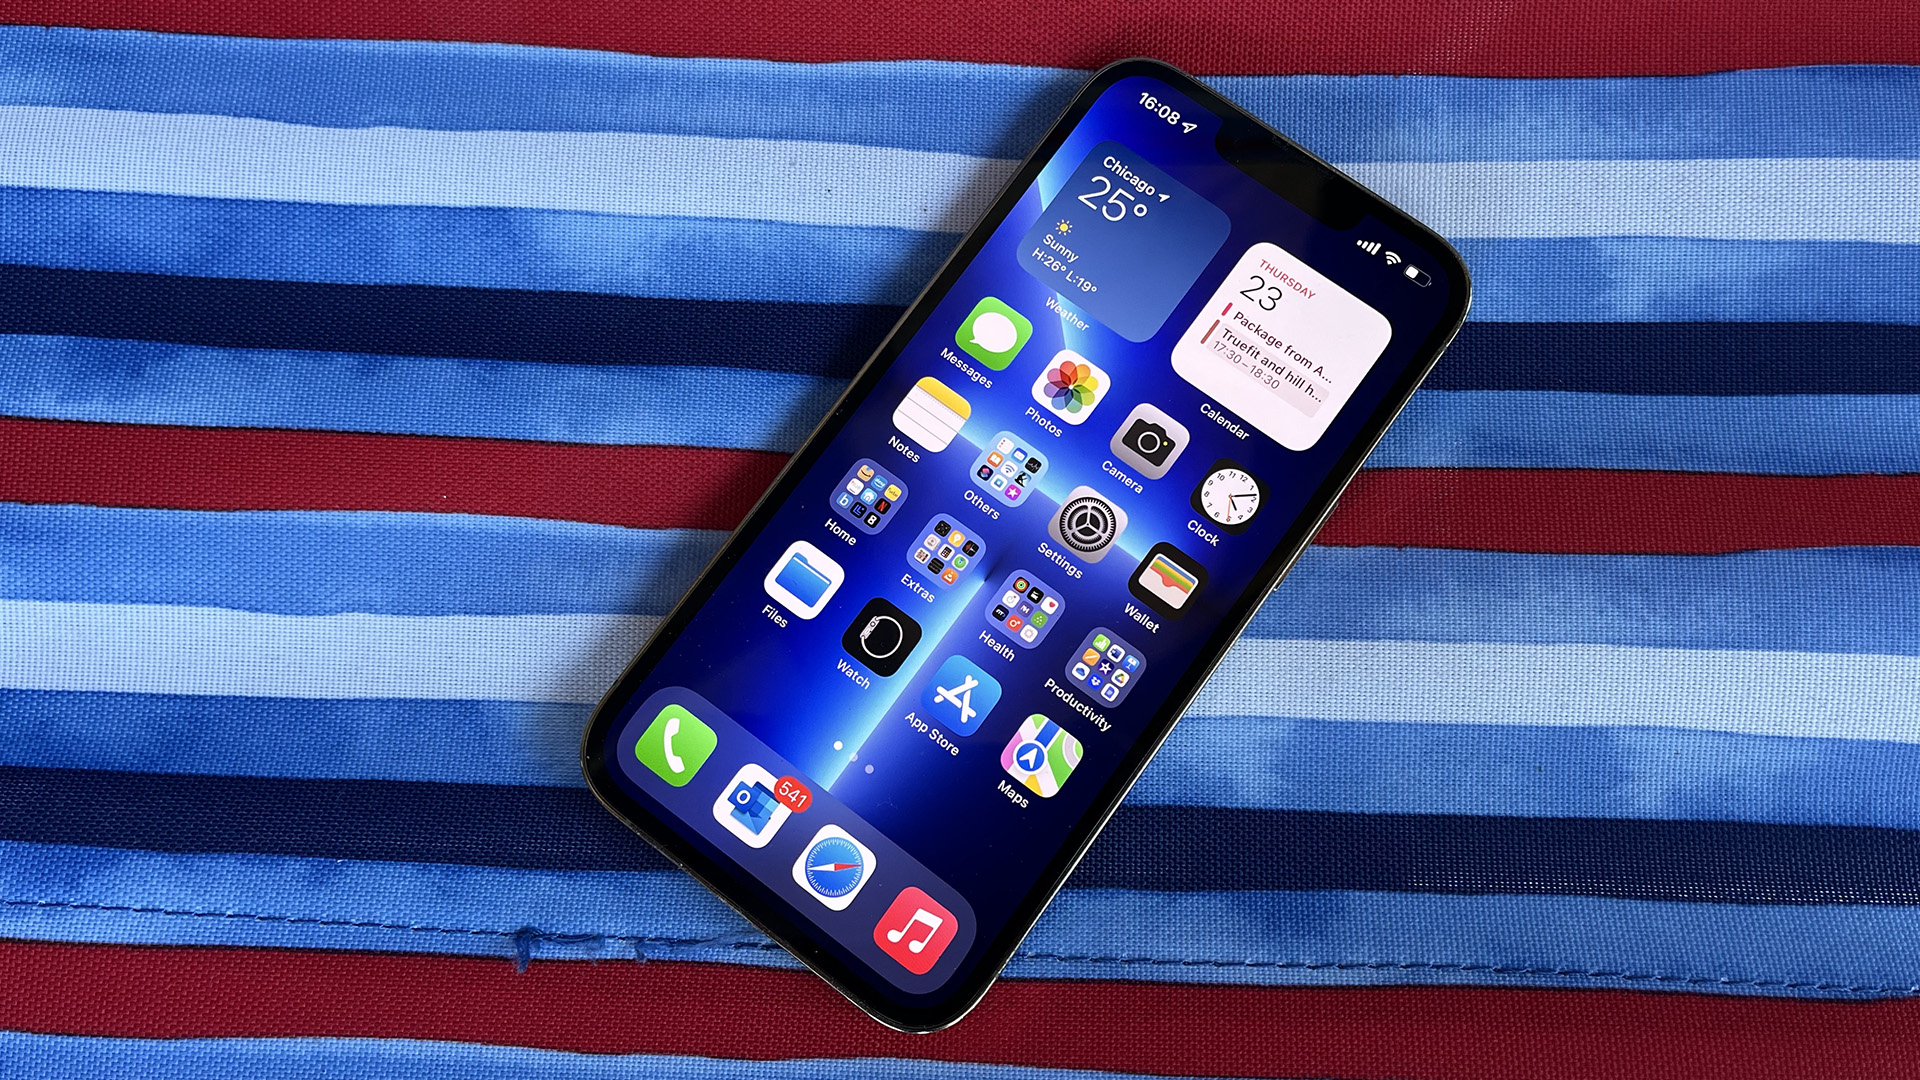 iPhone 13 Pro review: One of the best phones ever